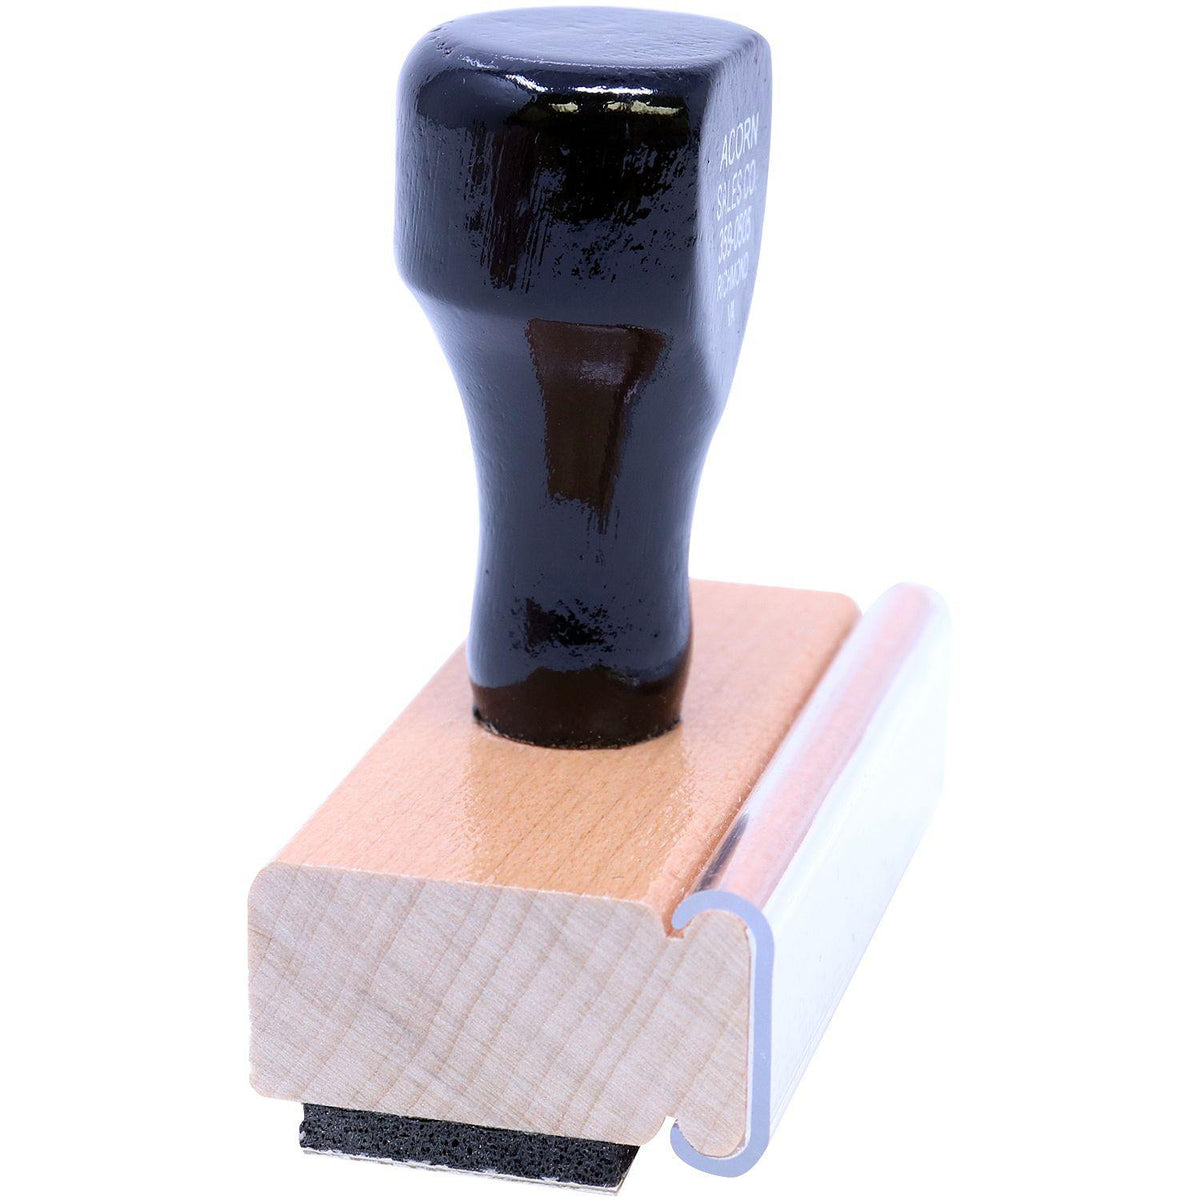 Side View of Debtor Exhibit Rubber Stamp at an Angle